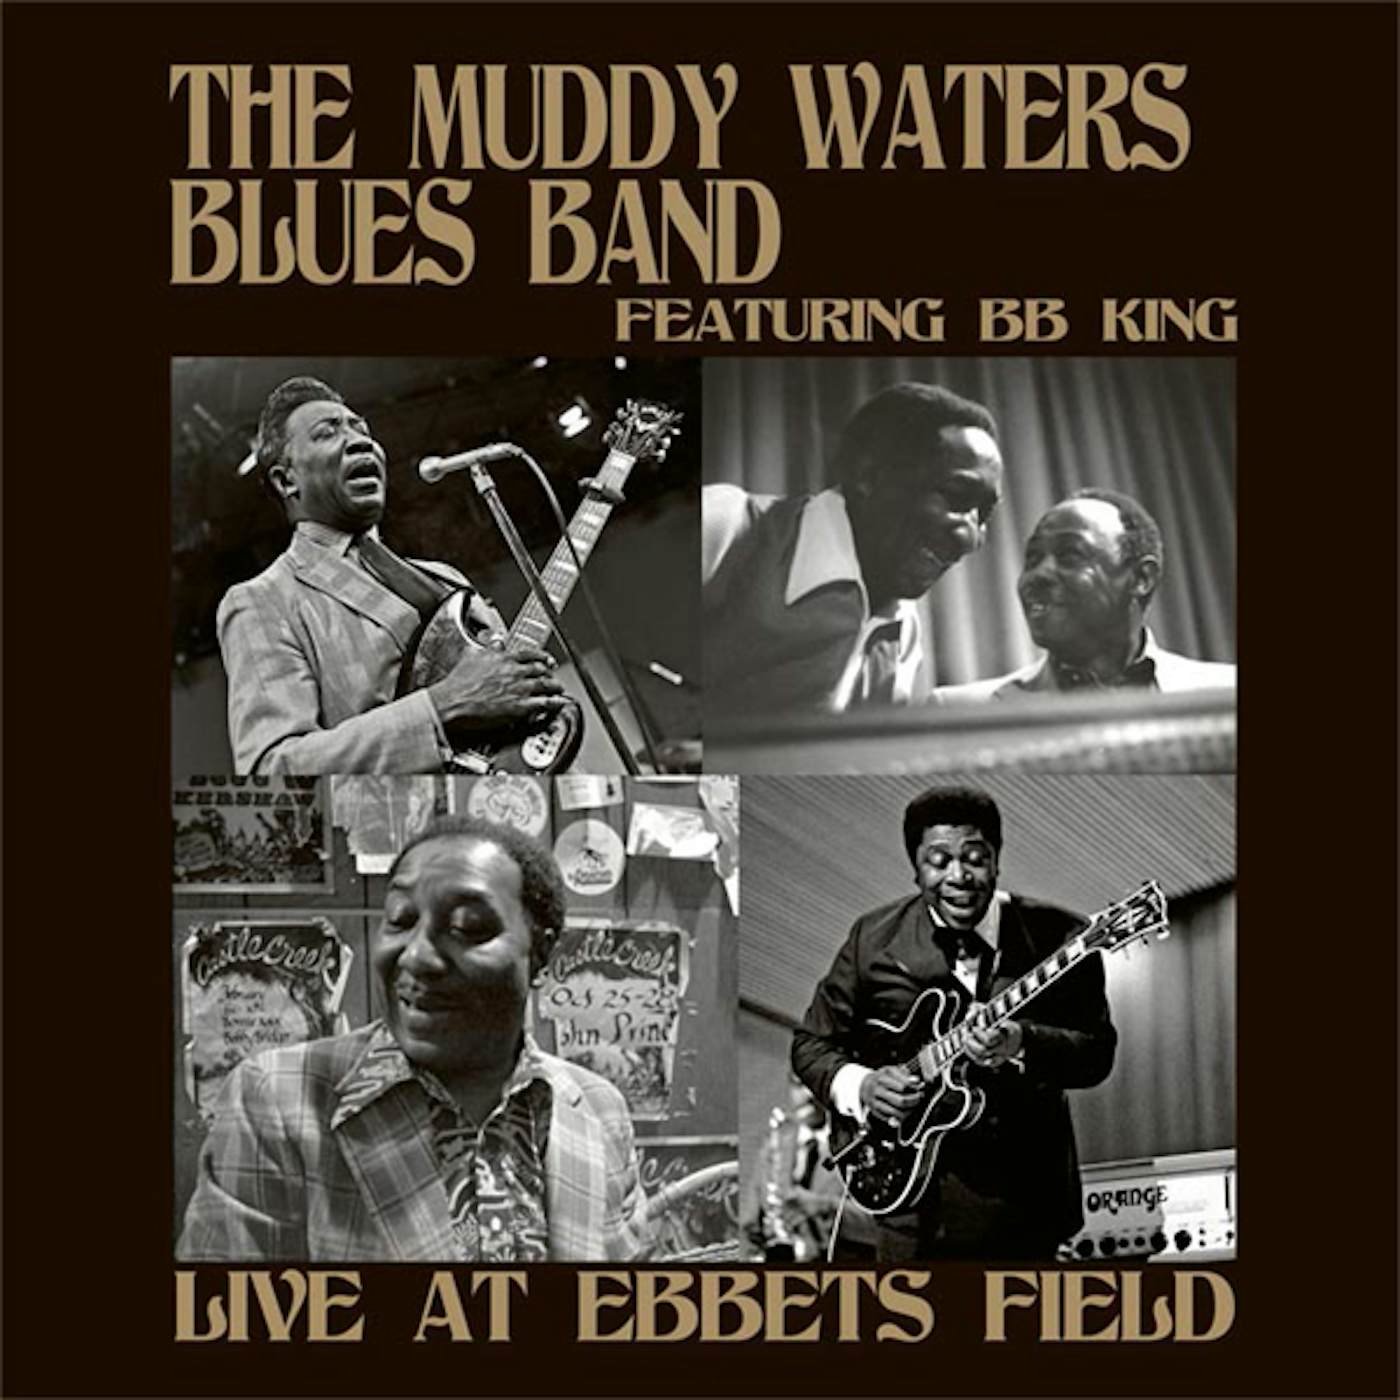 Muddy Waters Blues Band Live At Ebbets Field Vinyl Record